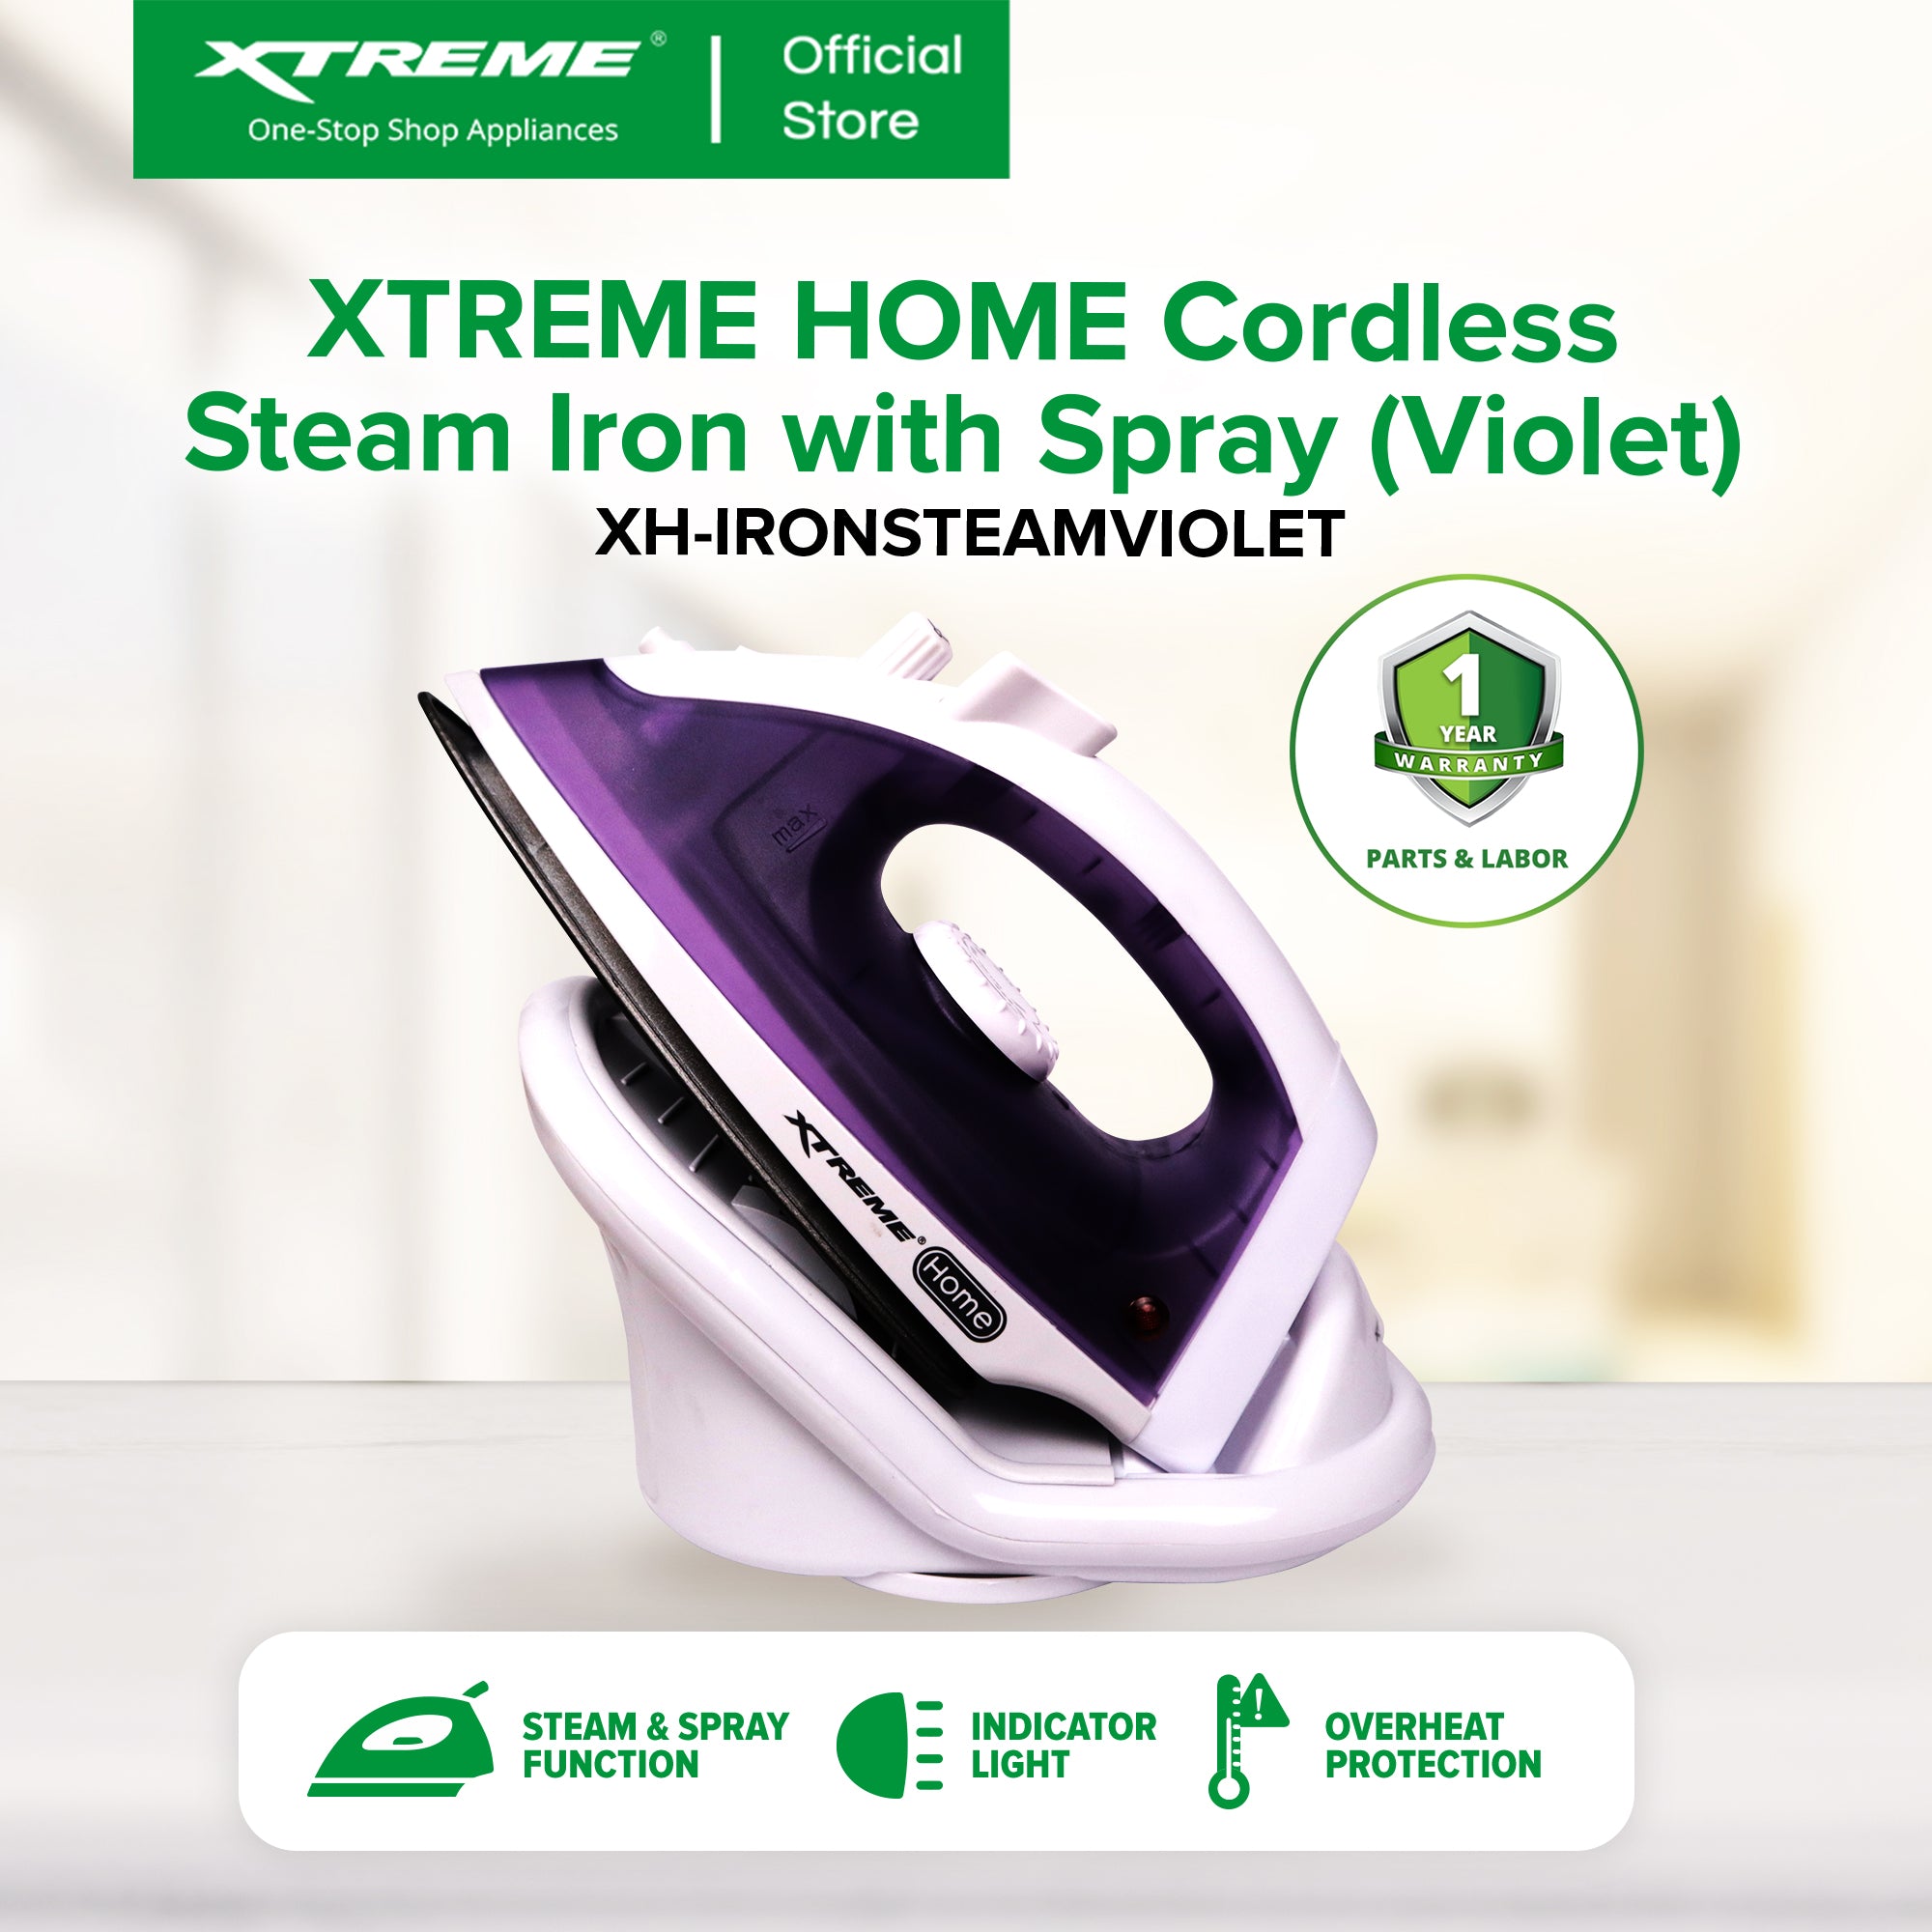 XTREME HOME Cordless Steam Iron with Spray Ceramic Soleplate & Indicator Light (Violet) | XH-IRONSTEAMVIOLET